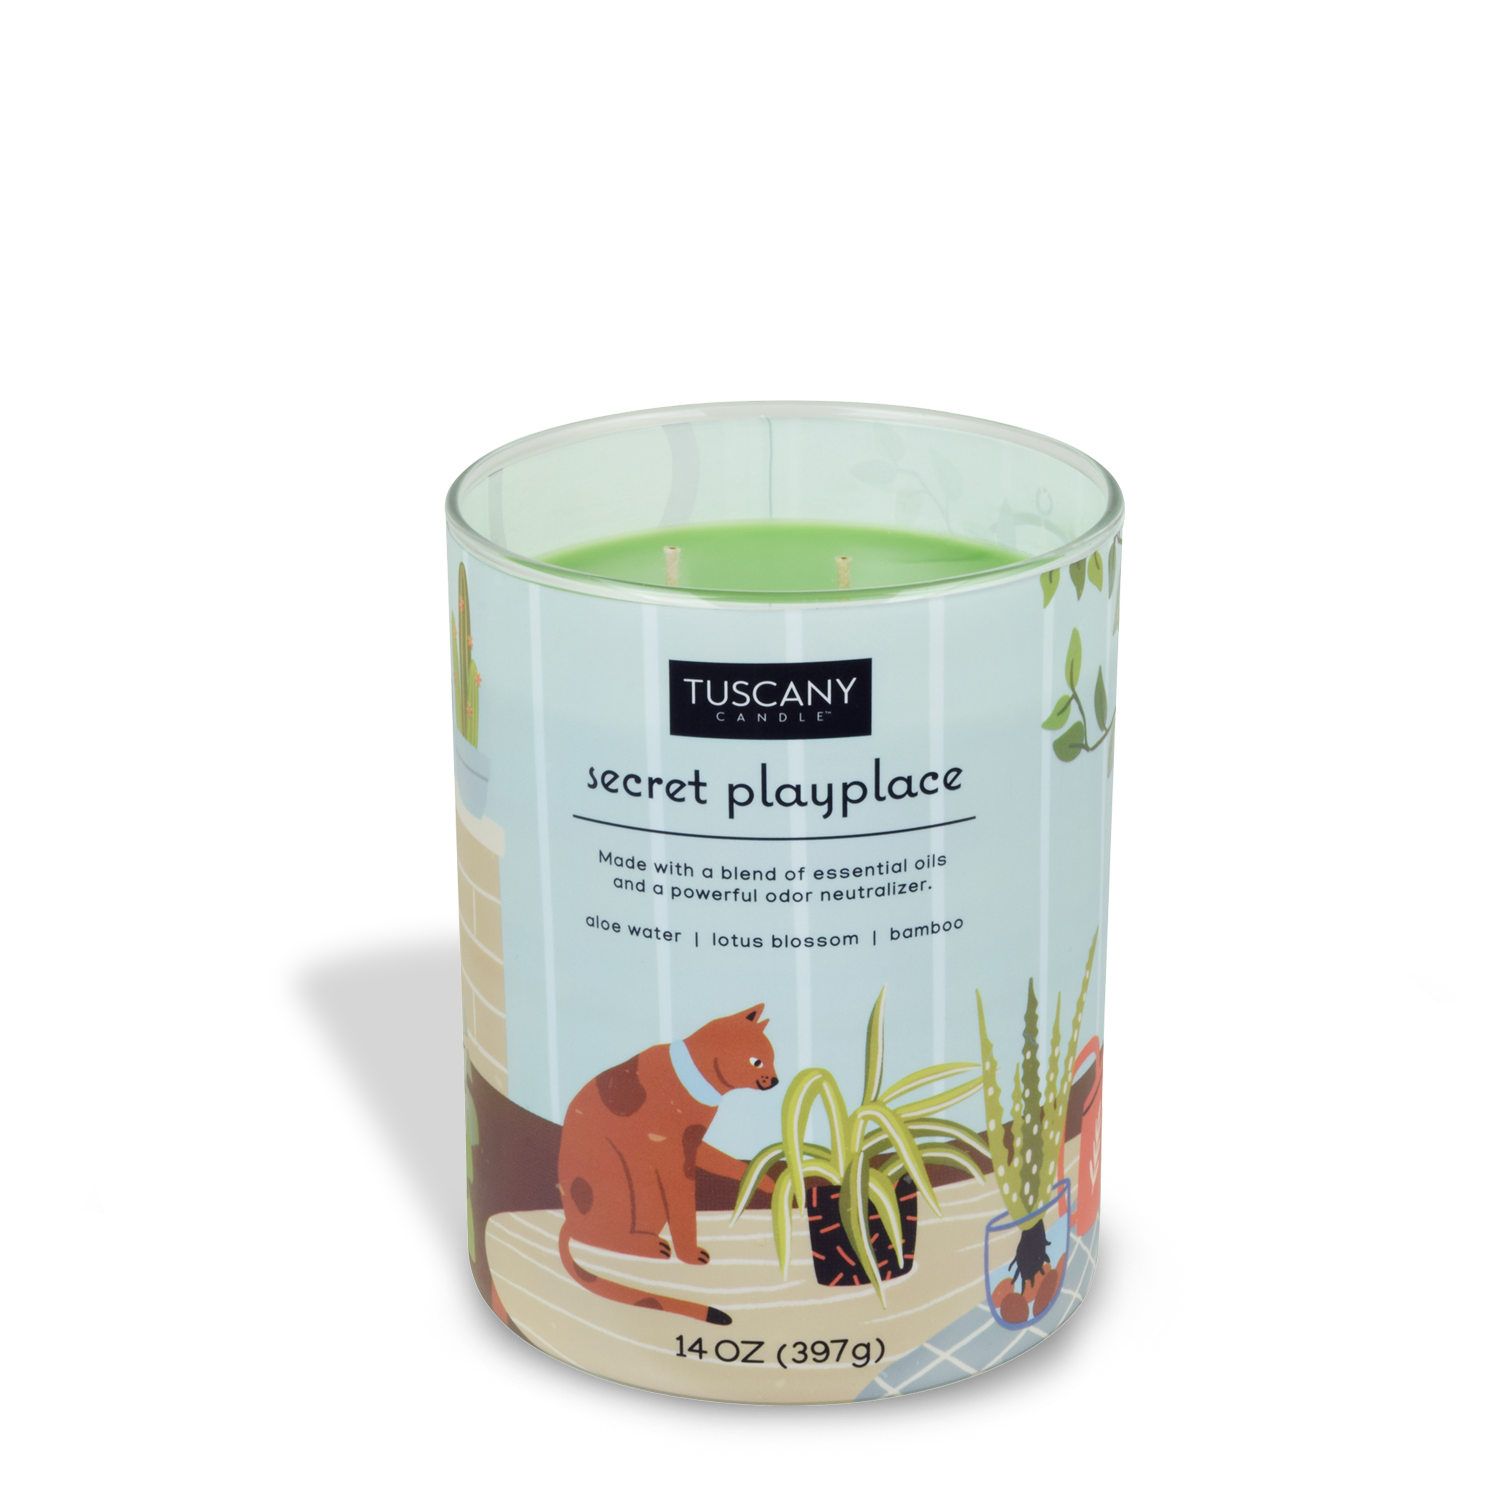 A Secret Playplace Scented Jar Candle (14 oz) from the Tuscany Candle brand, designed to neutralize pet odors using enzymes.